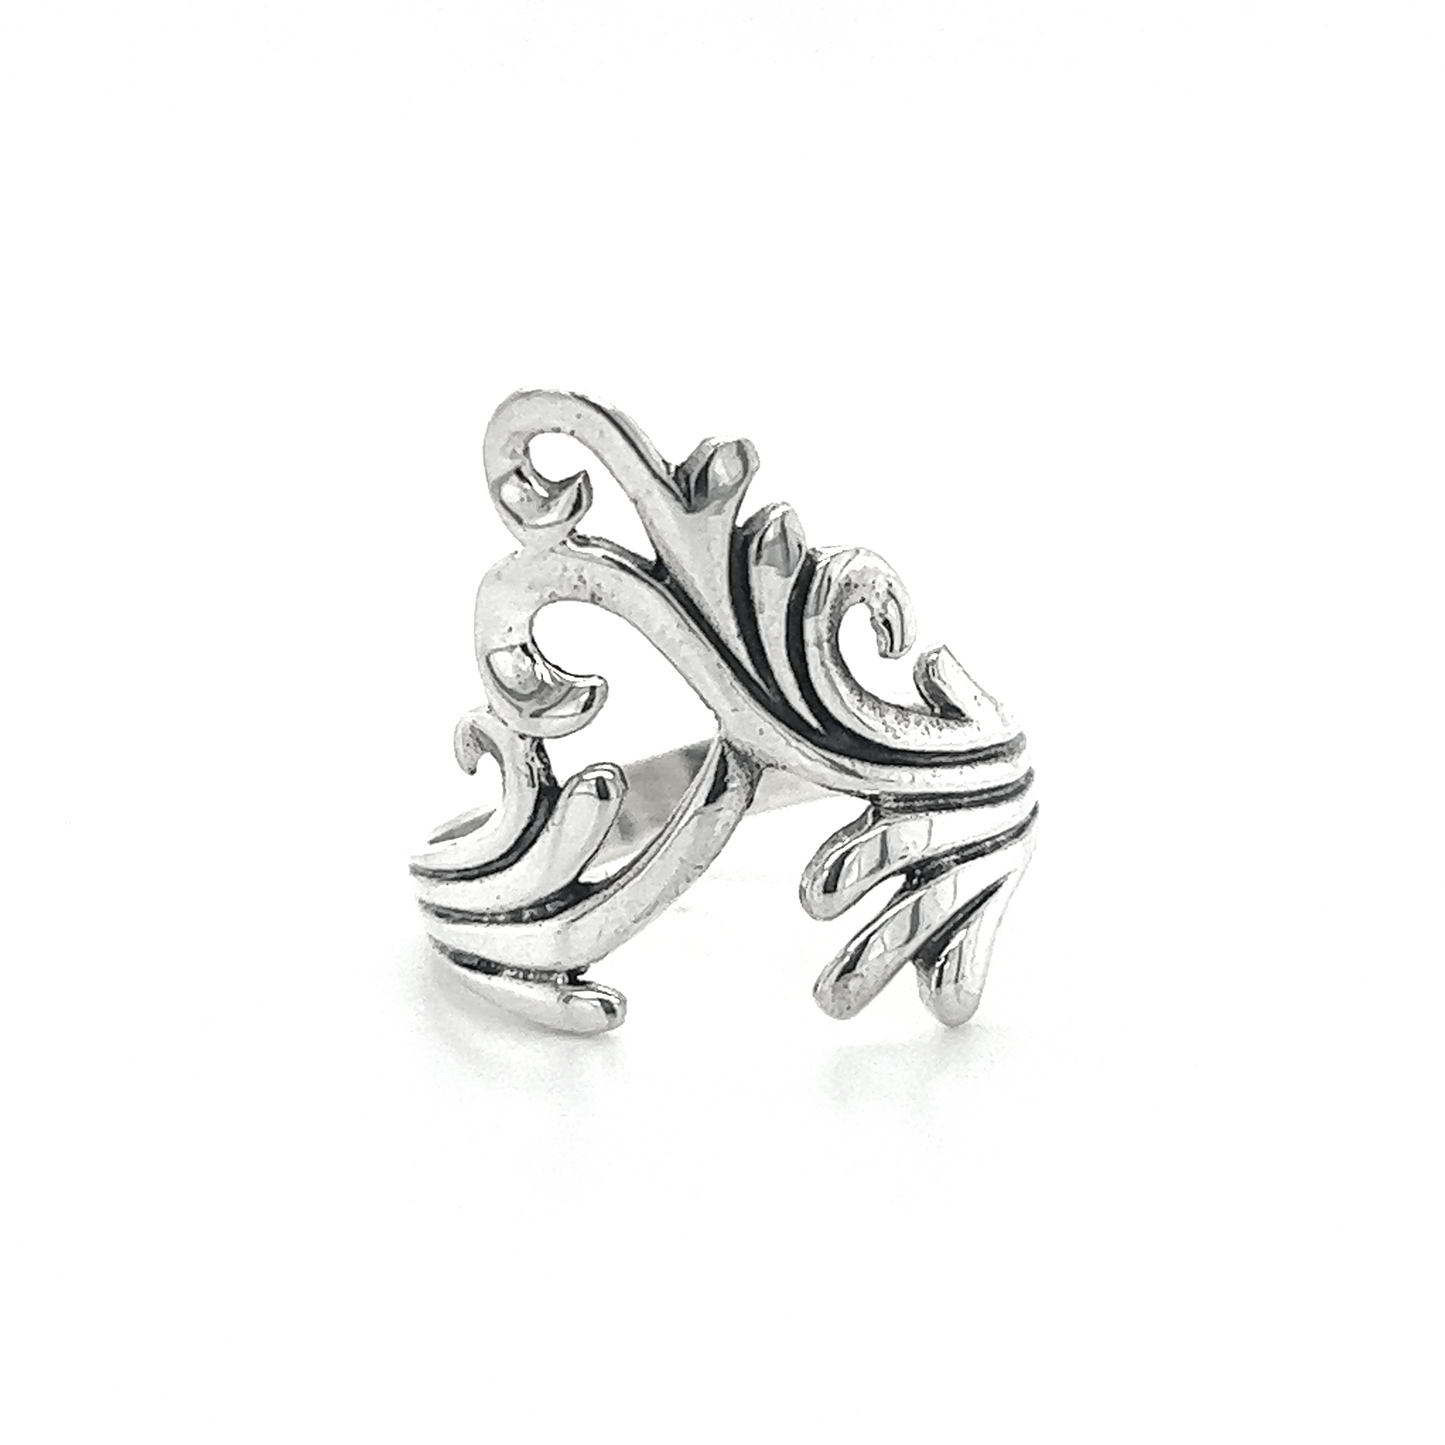 A Super Silver Statement Freeform Ring with an ornate design.